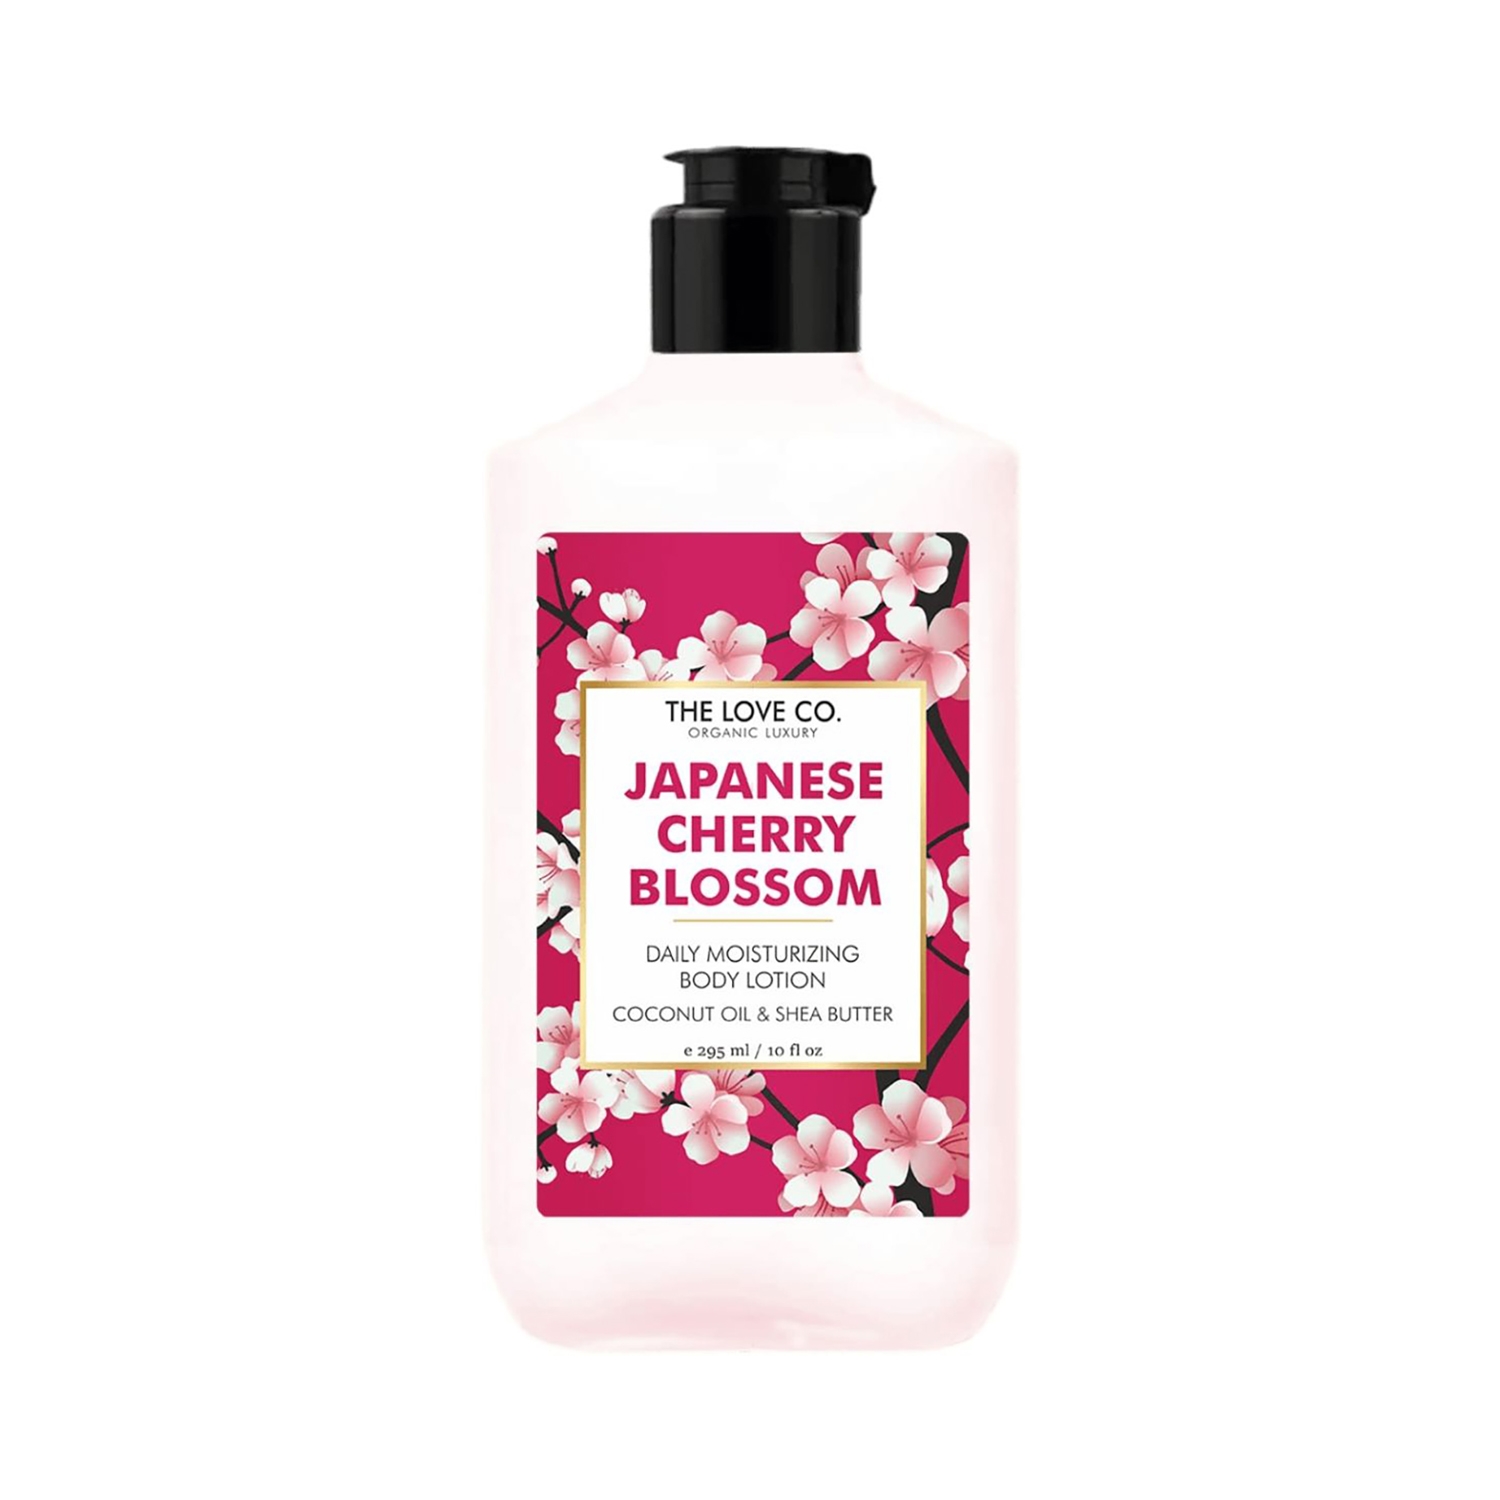 THE LOVE CO. | THE LOVE CO. Japanese Cherry Blossom Daily Moisturizing Body Lotion (295ml)